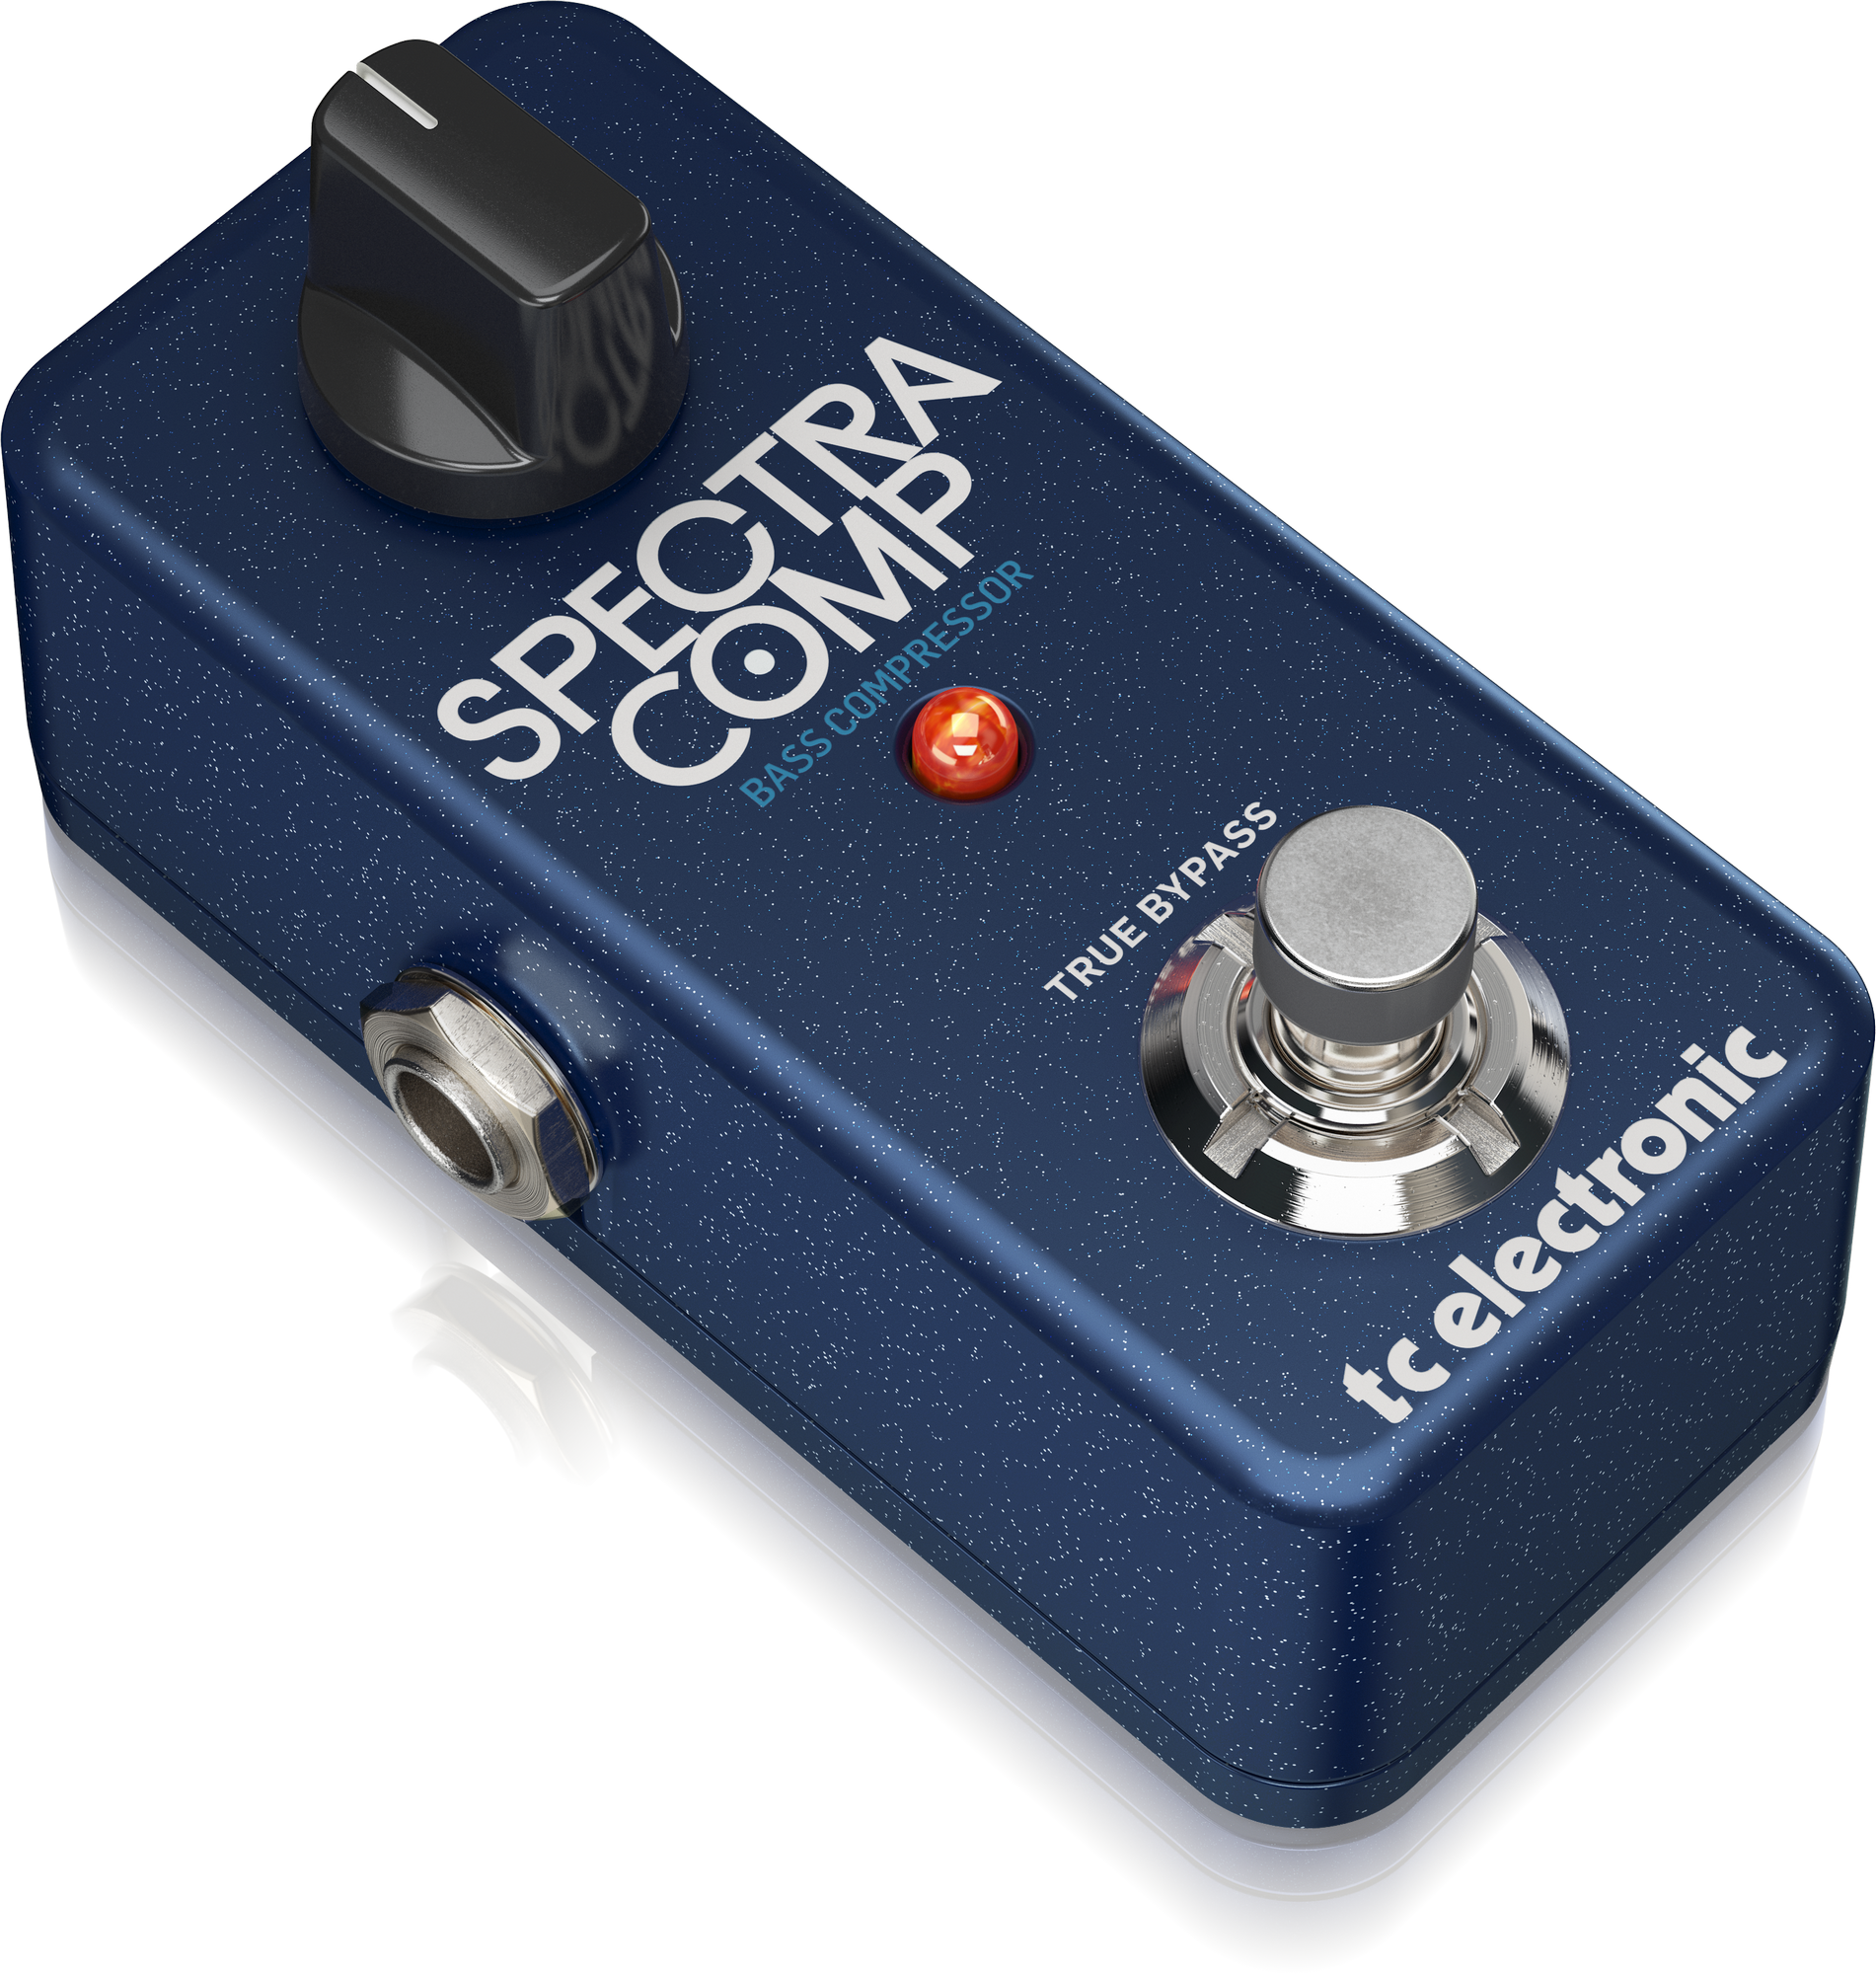 TC Electronic Spectracomp Bass Compressor Ultra-compact Multiband Compression Pedal For Bass With Built-in Toneprint Technology, TC ELECTRONIC, EFFECTS, tc-electronic-effects-tc-spectracomp-bass-compressor, ZOSO MUSIC SDN BHD